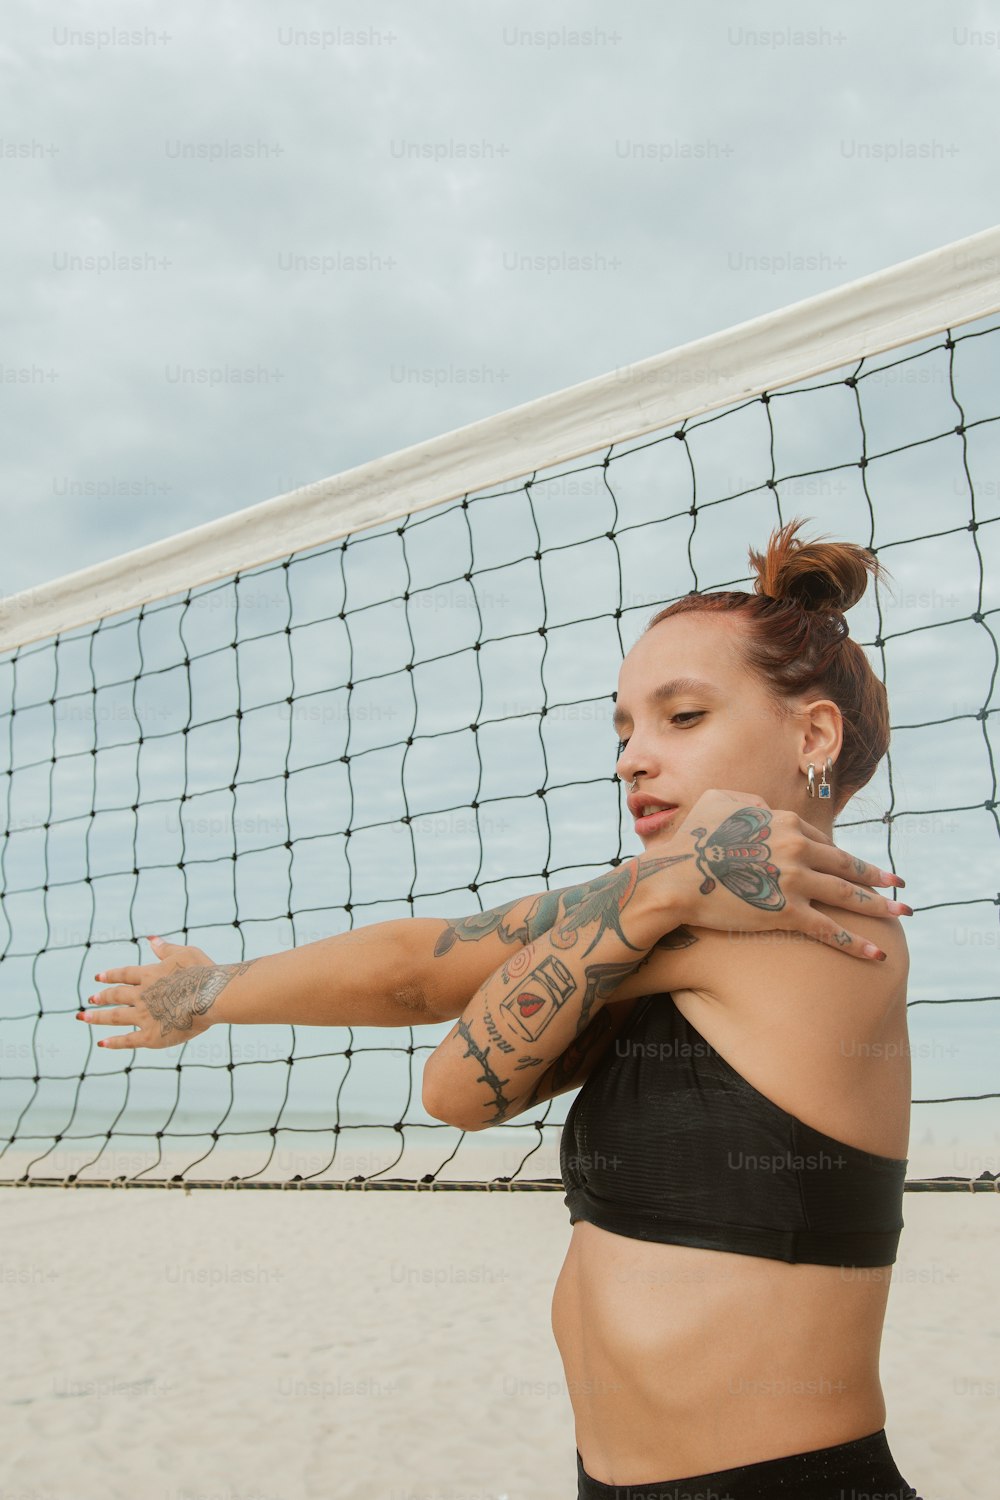 a woman with tattoos on her arm standing in front of a volleyball net